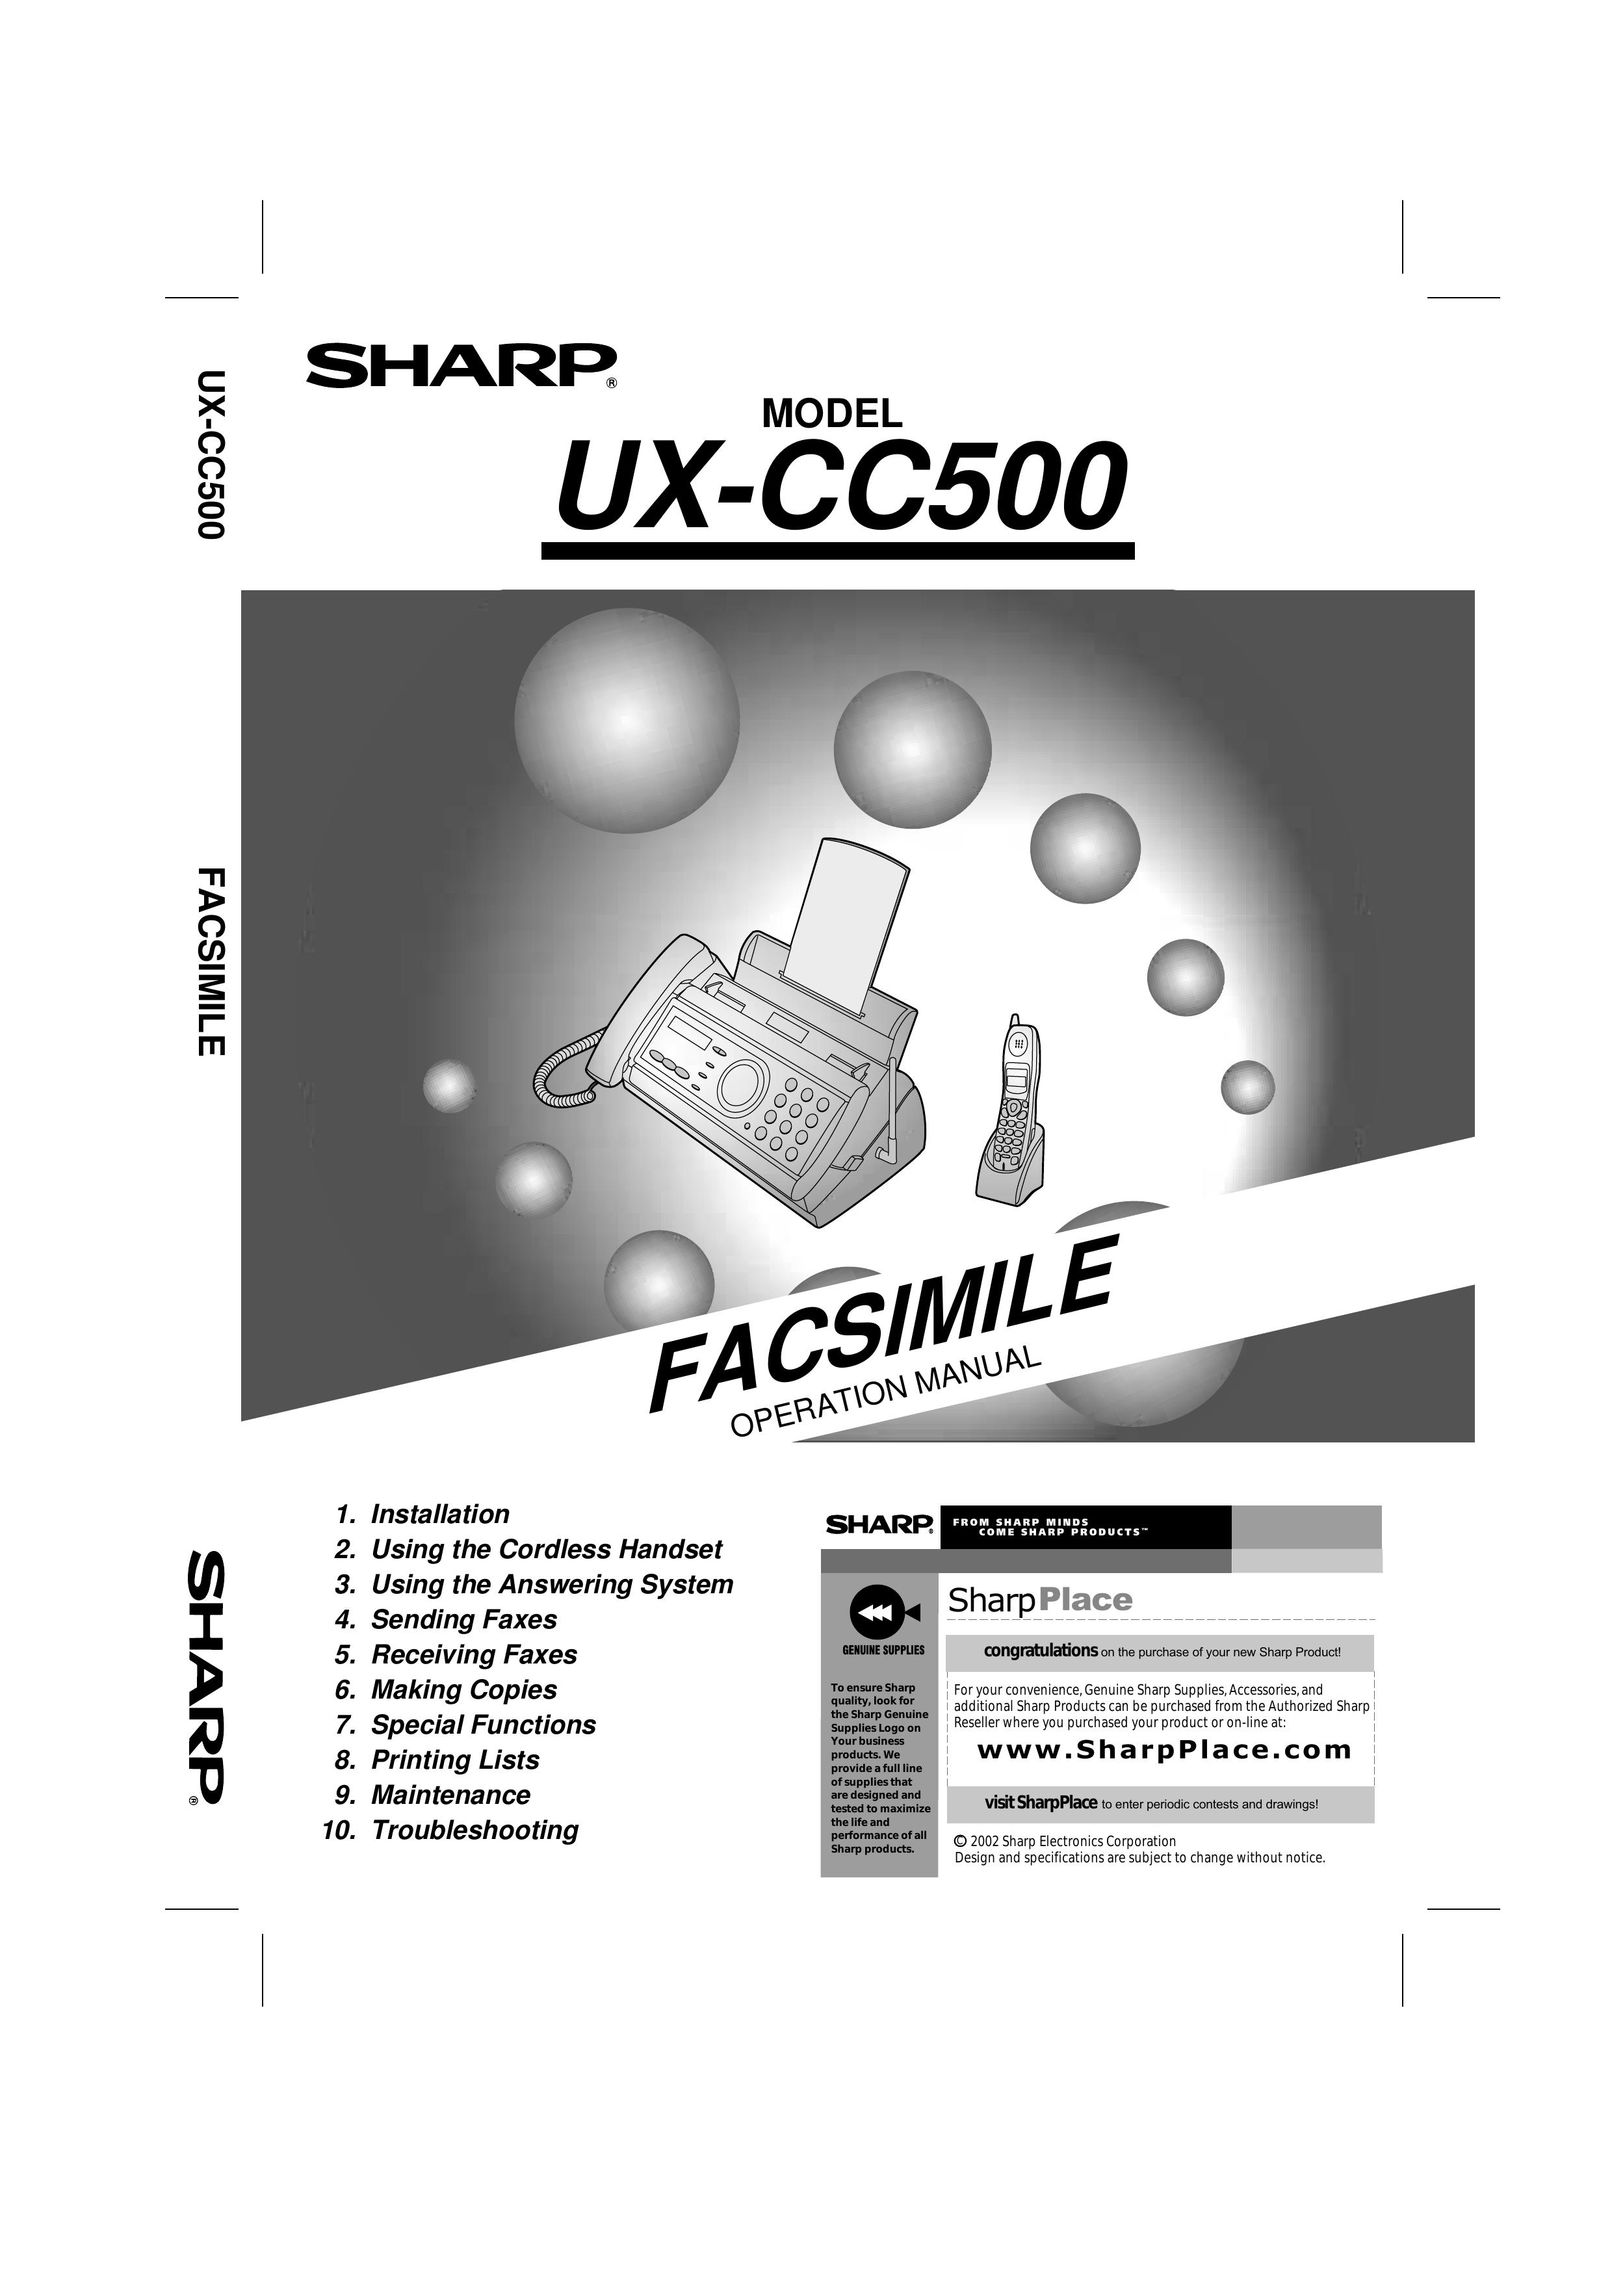 West Bend Back to Basics UX-CC500 Fax Machine User Manual